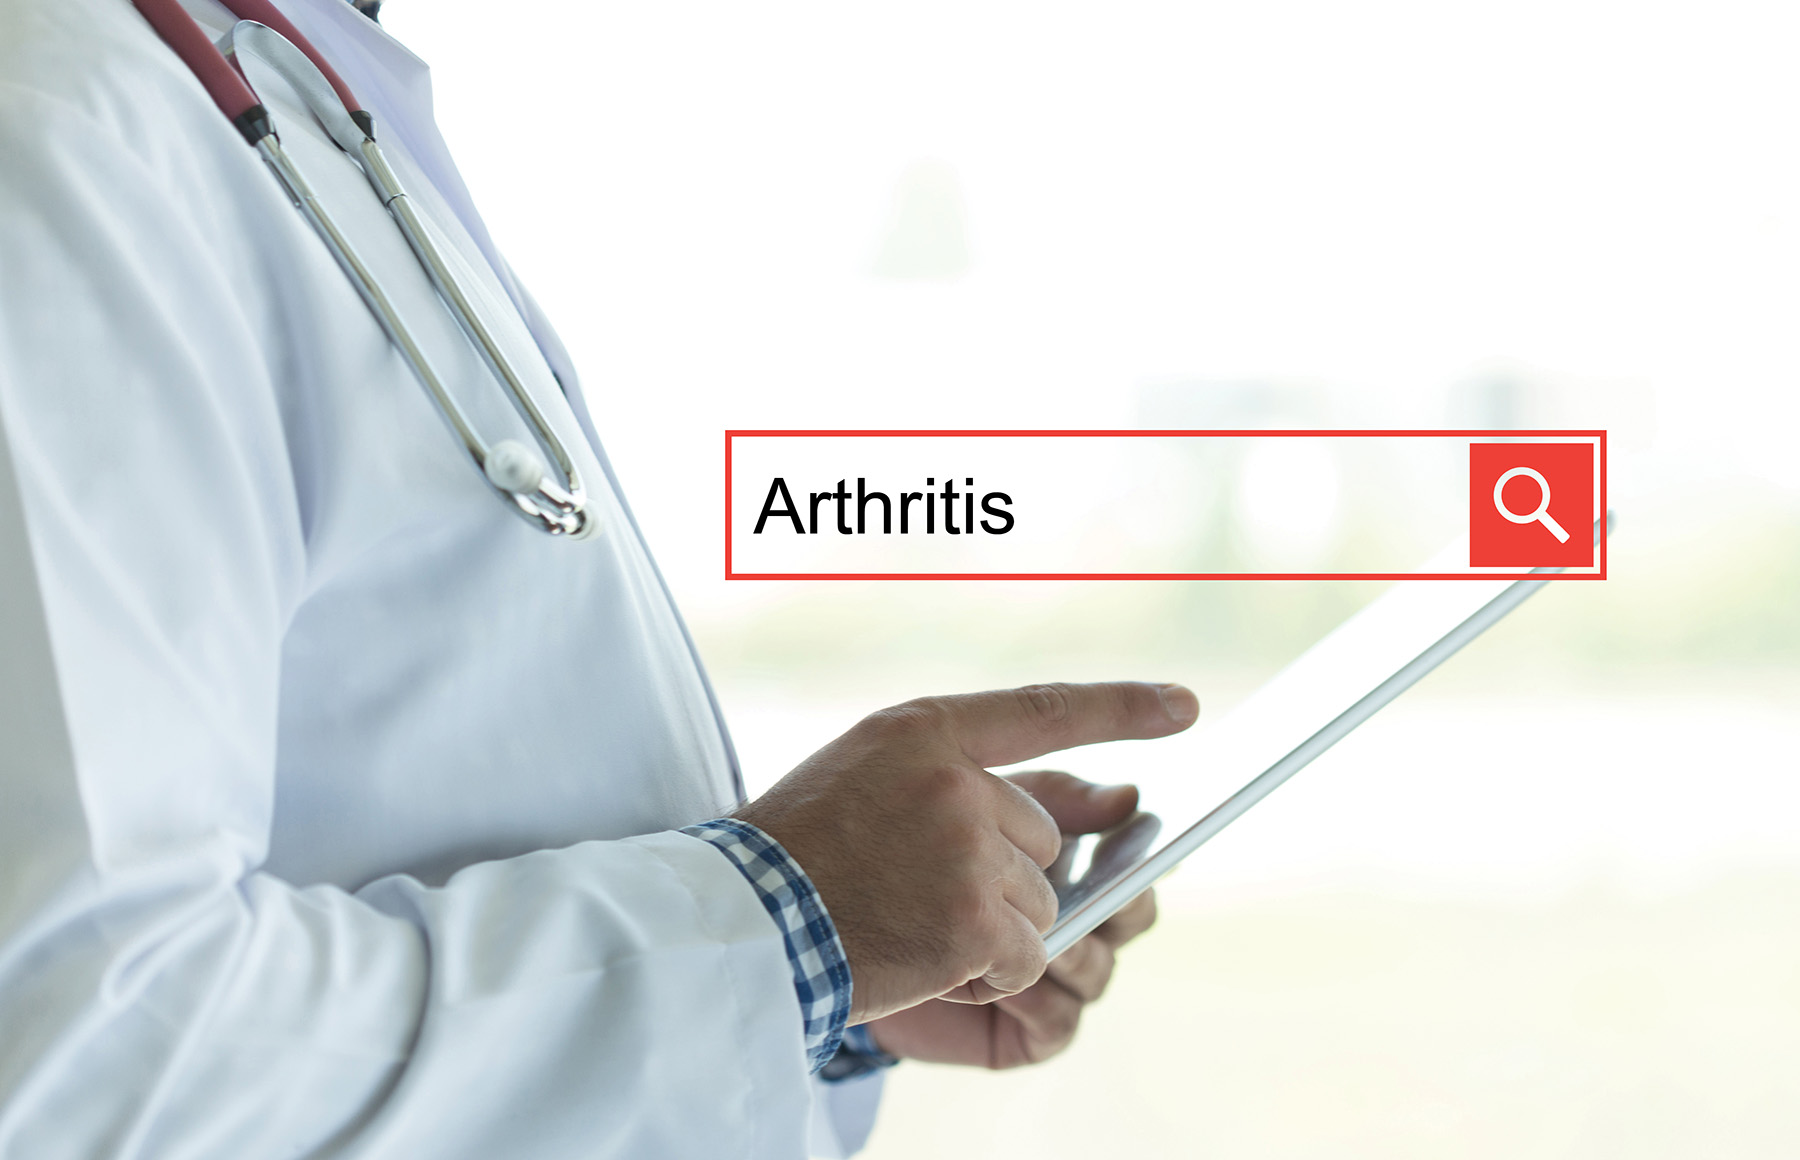 Online search bar with arthritis typed in. Doctor on tablet in background.